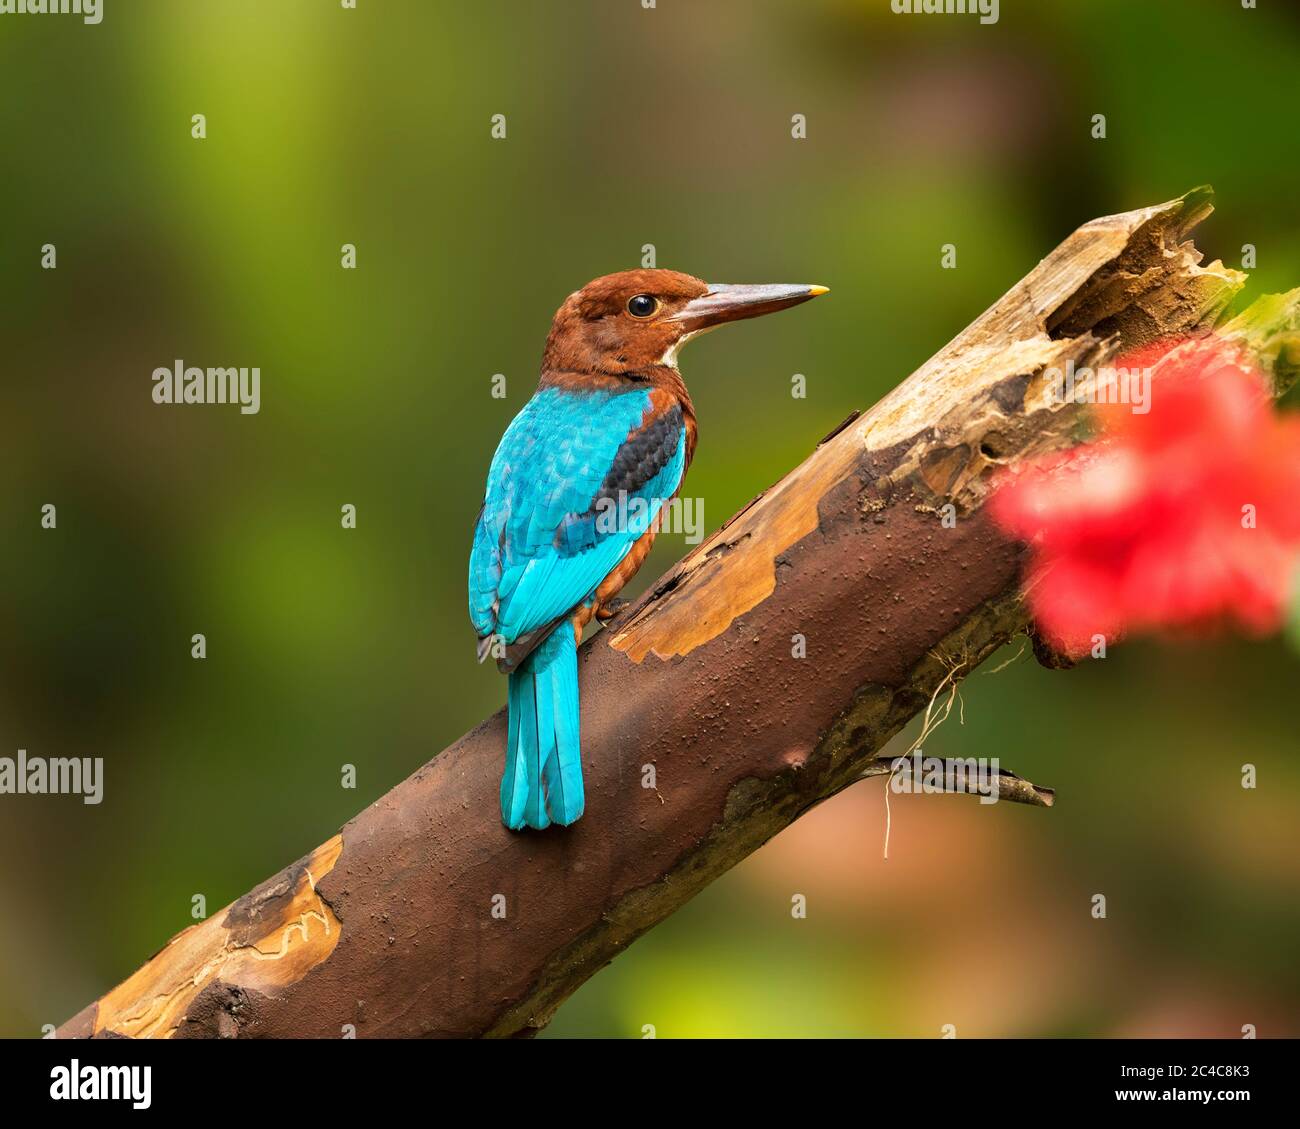 Kingfishers or Alcedinidae are a family of small to medium-sized, brightly colored birds in the order Coraciiformes. Stock Photo